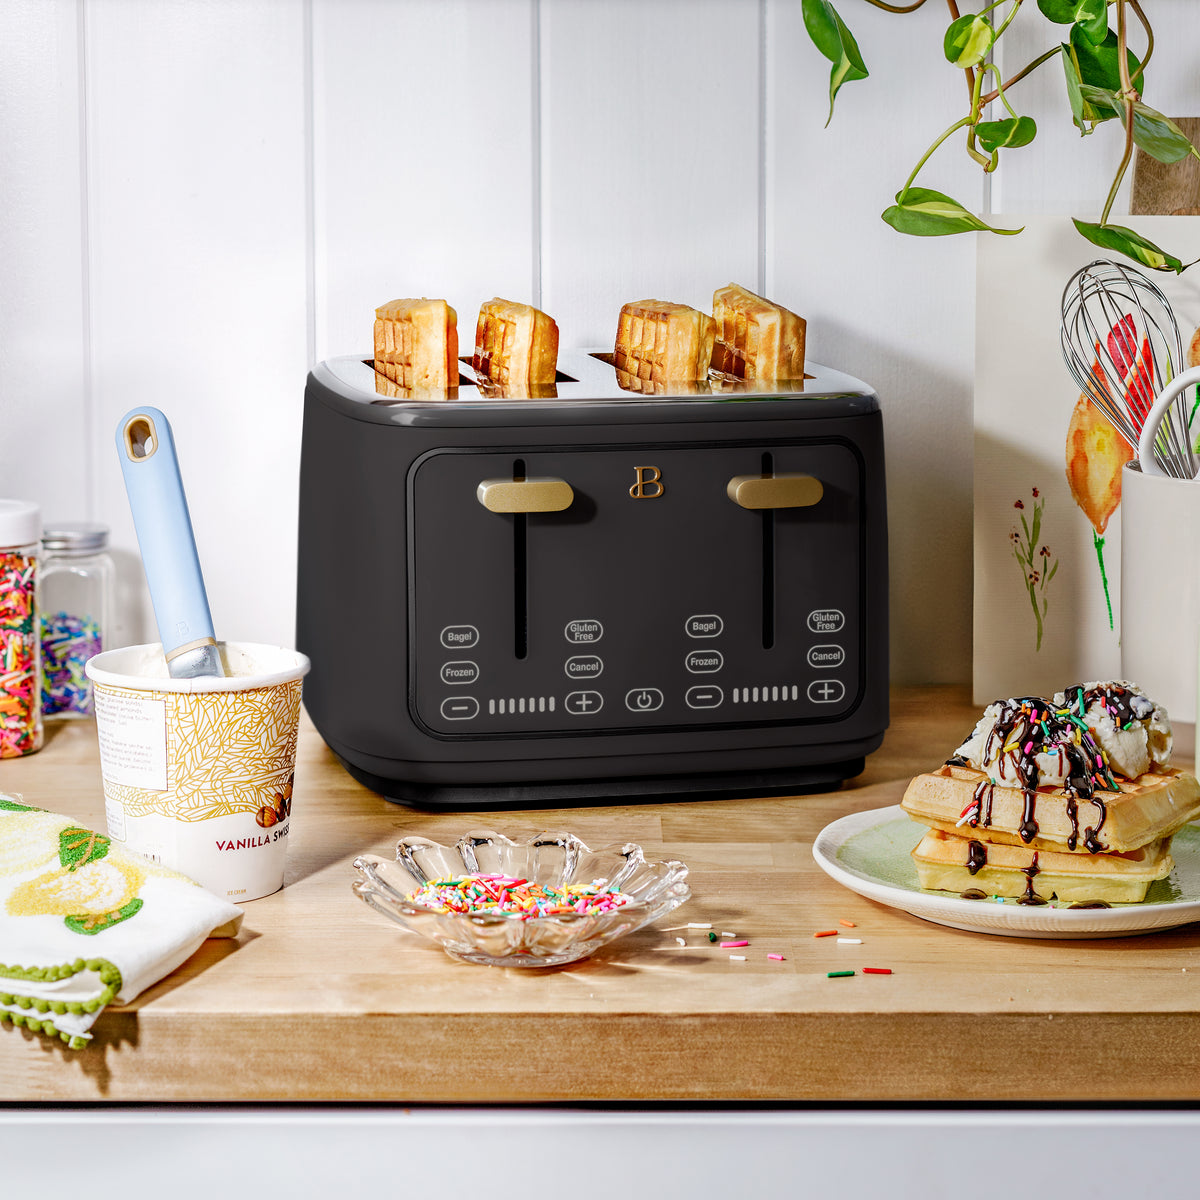 Beautiful 2 Slice Touchscreen Toaster, White Icing by Drew Barrymore